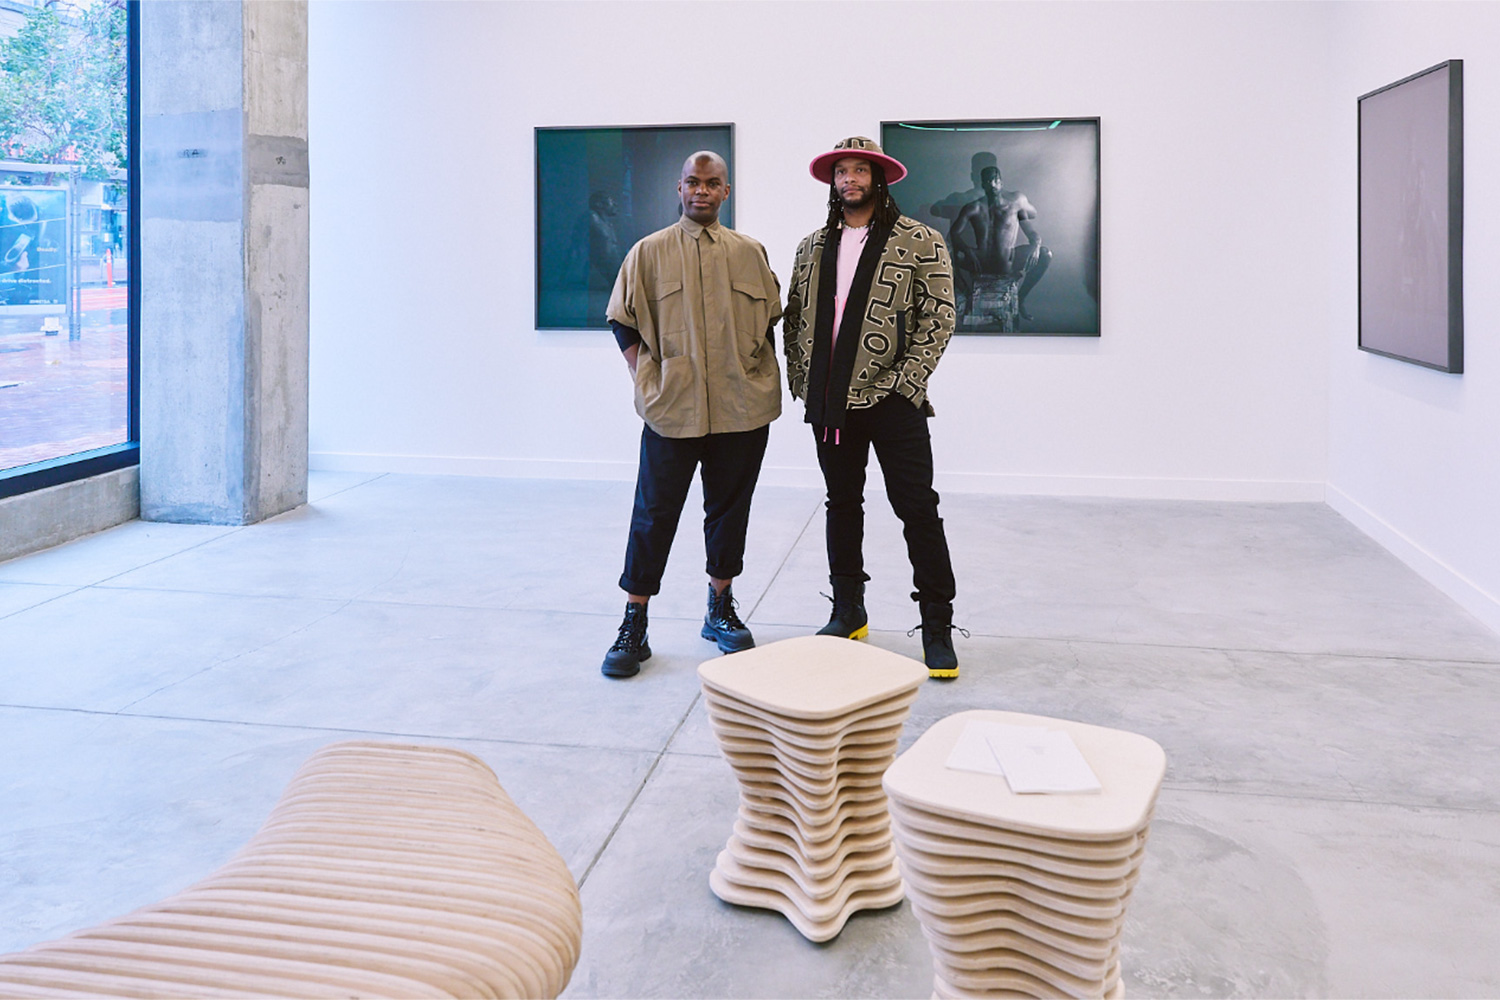 Jonathan Carver Moore (left) and artist Andrew Wilson (right)